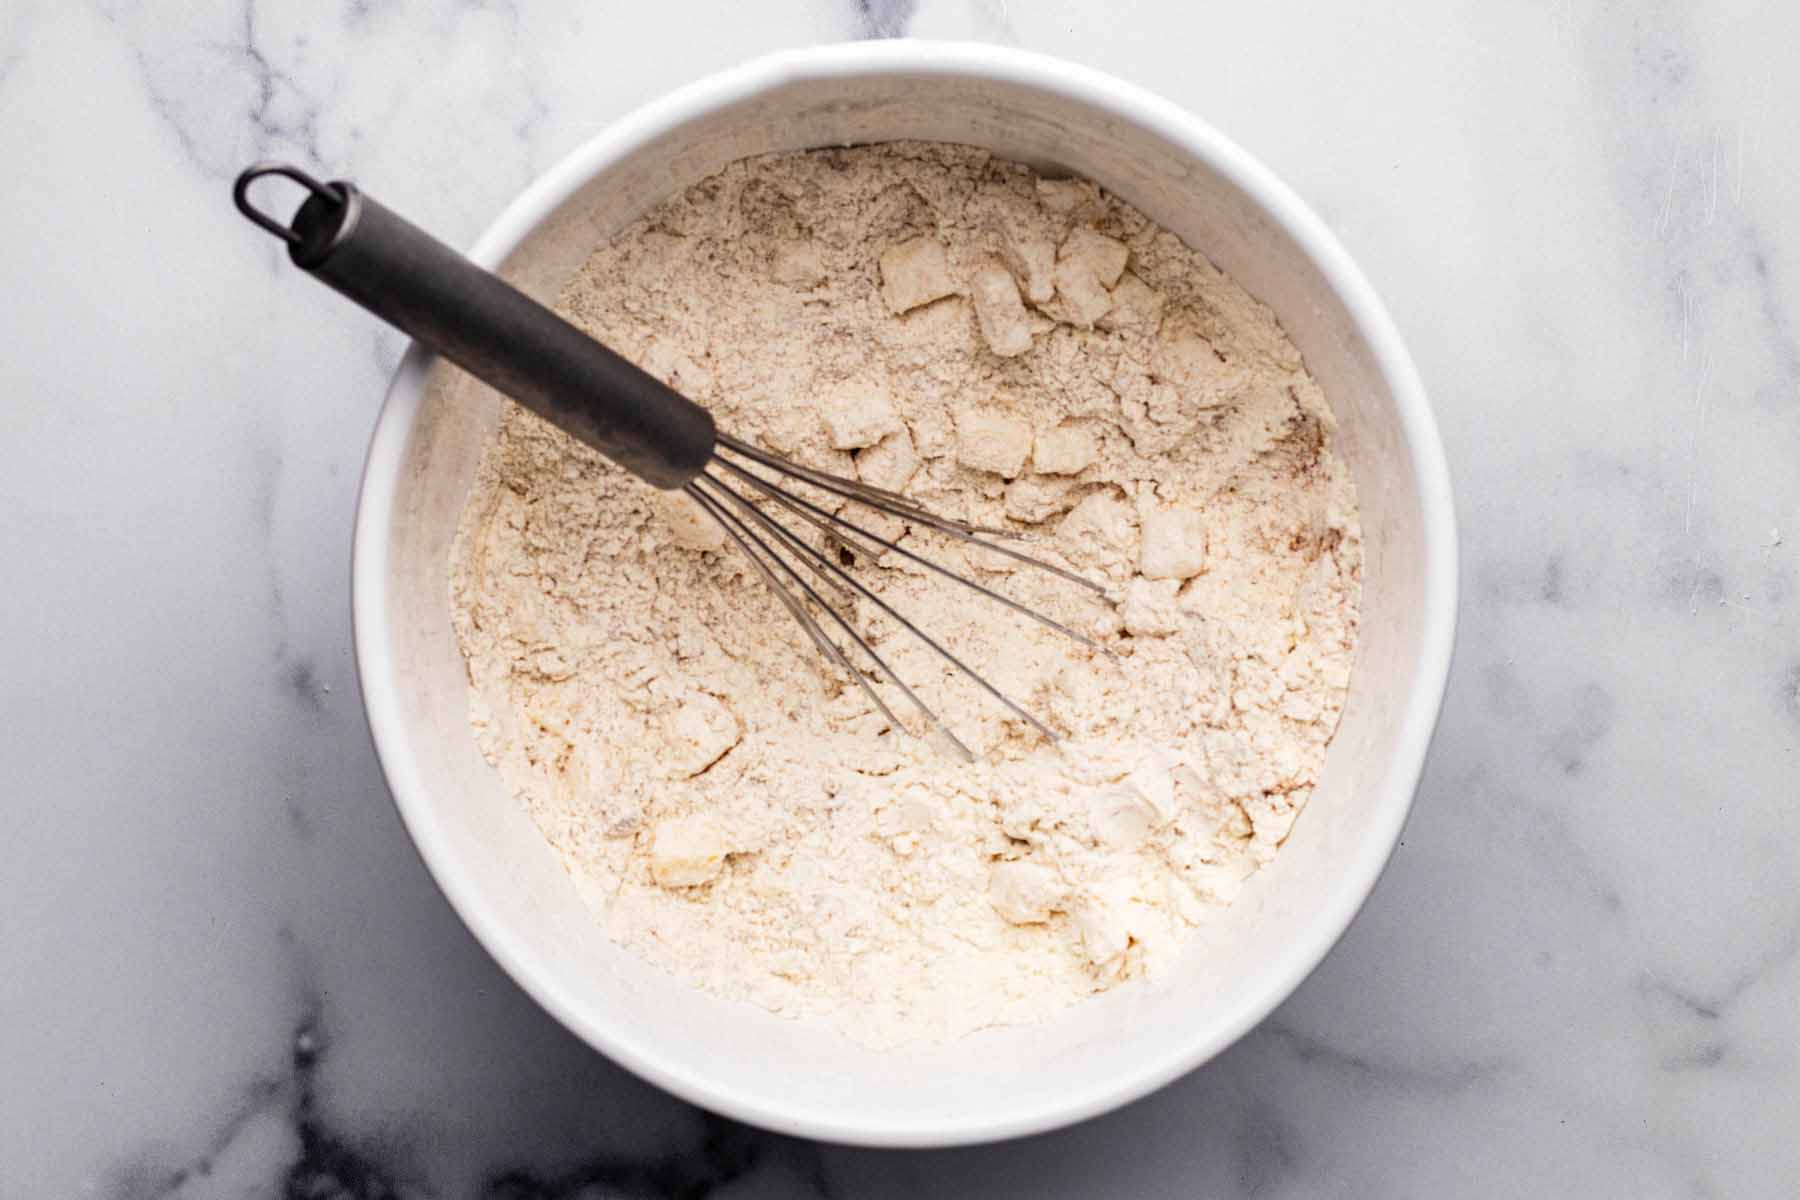 All dry ingredients whisked together in a white mixing bowl